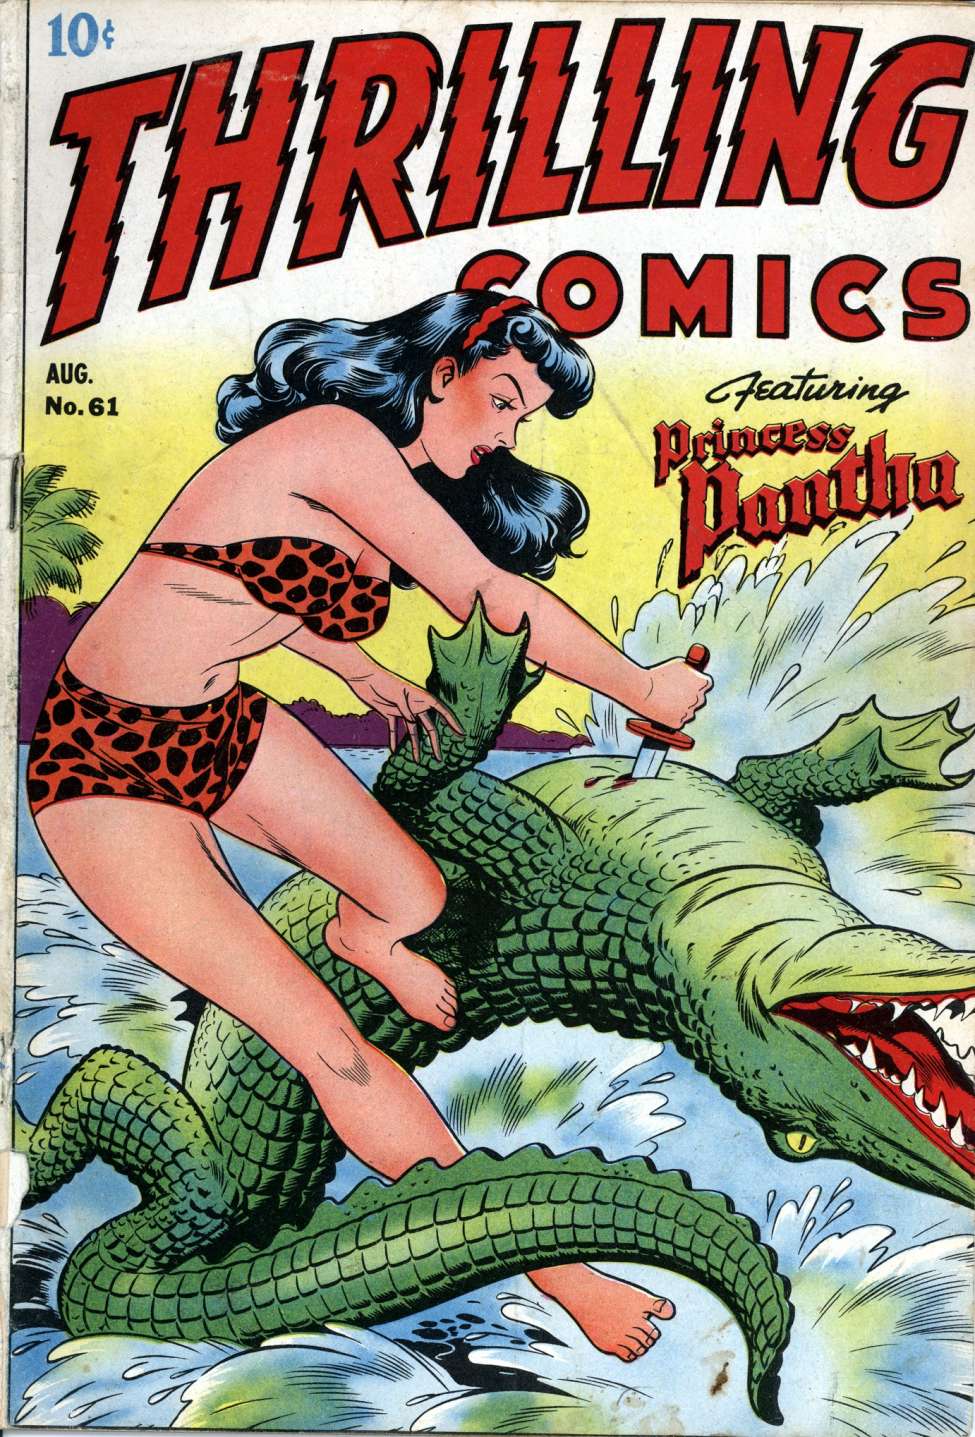 Book Cover For Thrilling Comics 61 (alt) - Version 2